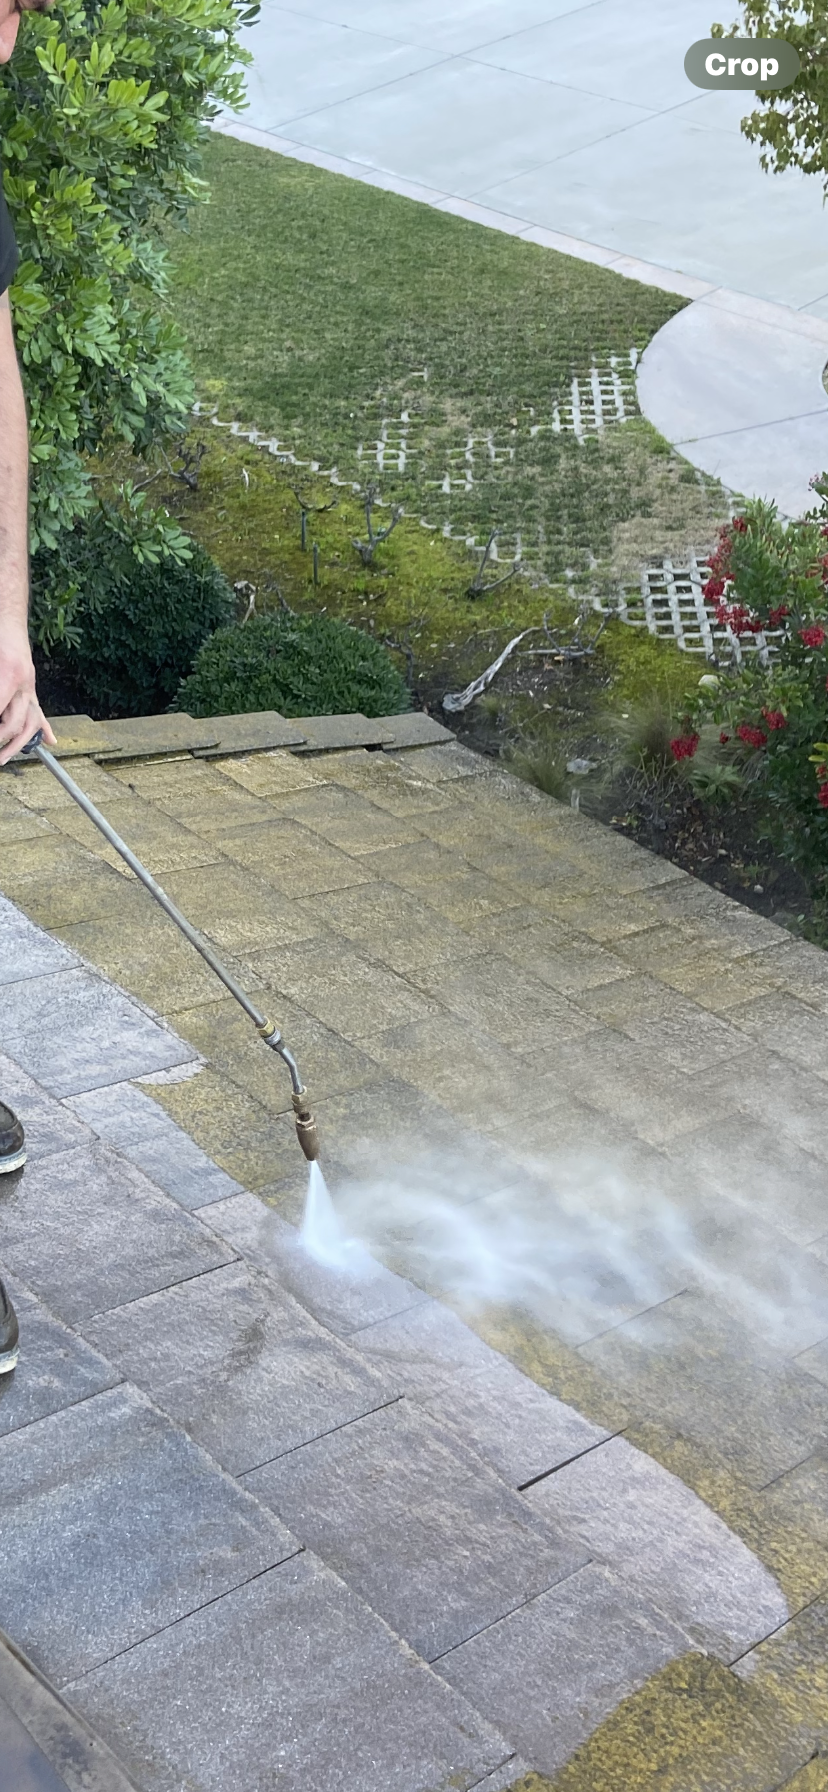 A person using a power washer to clean the patio.